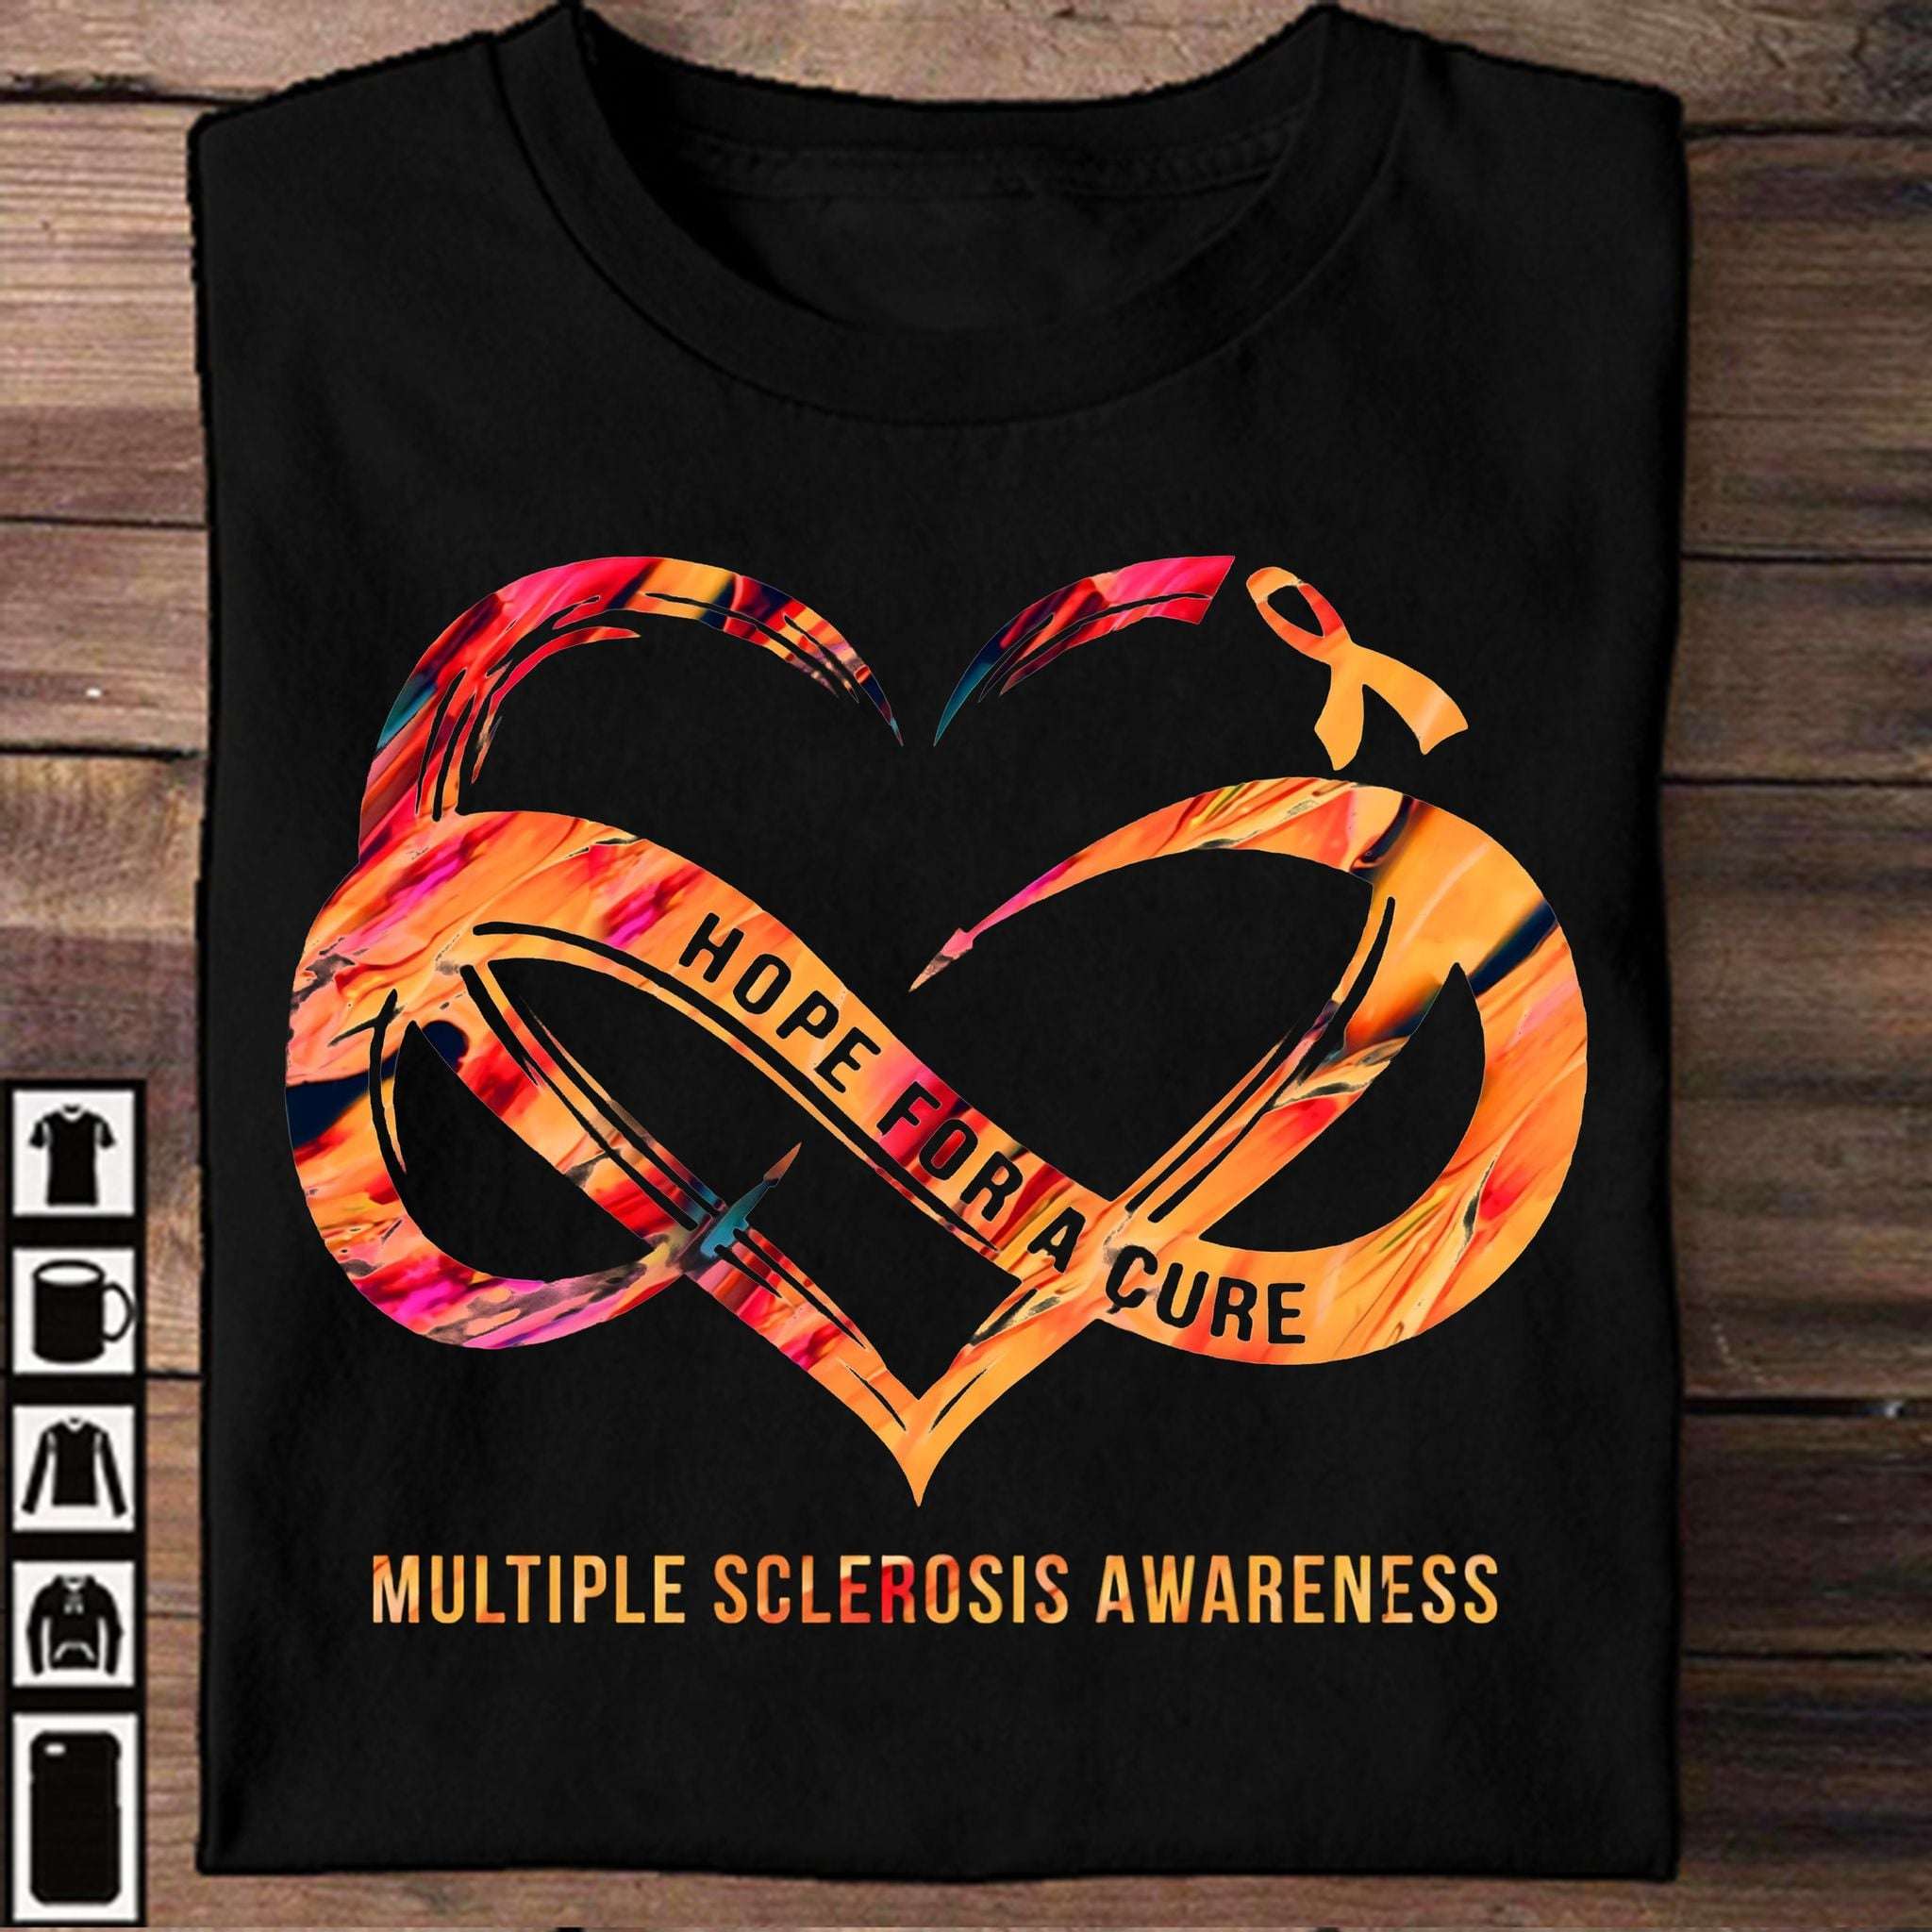 Hope for a cure multiple sclerosis awareness